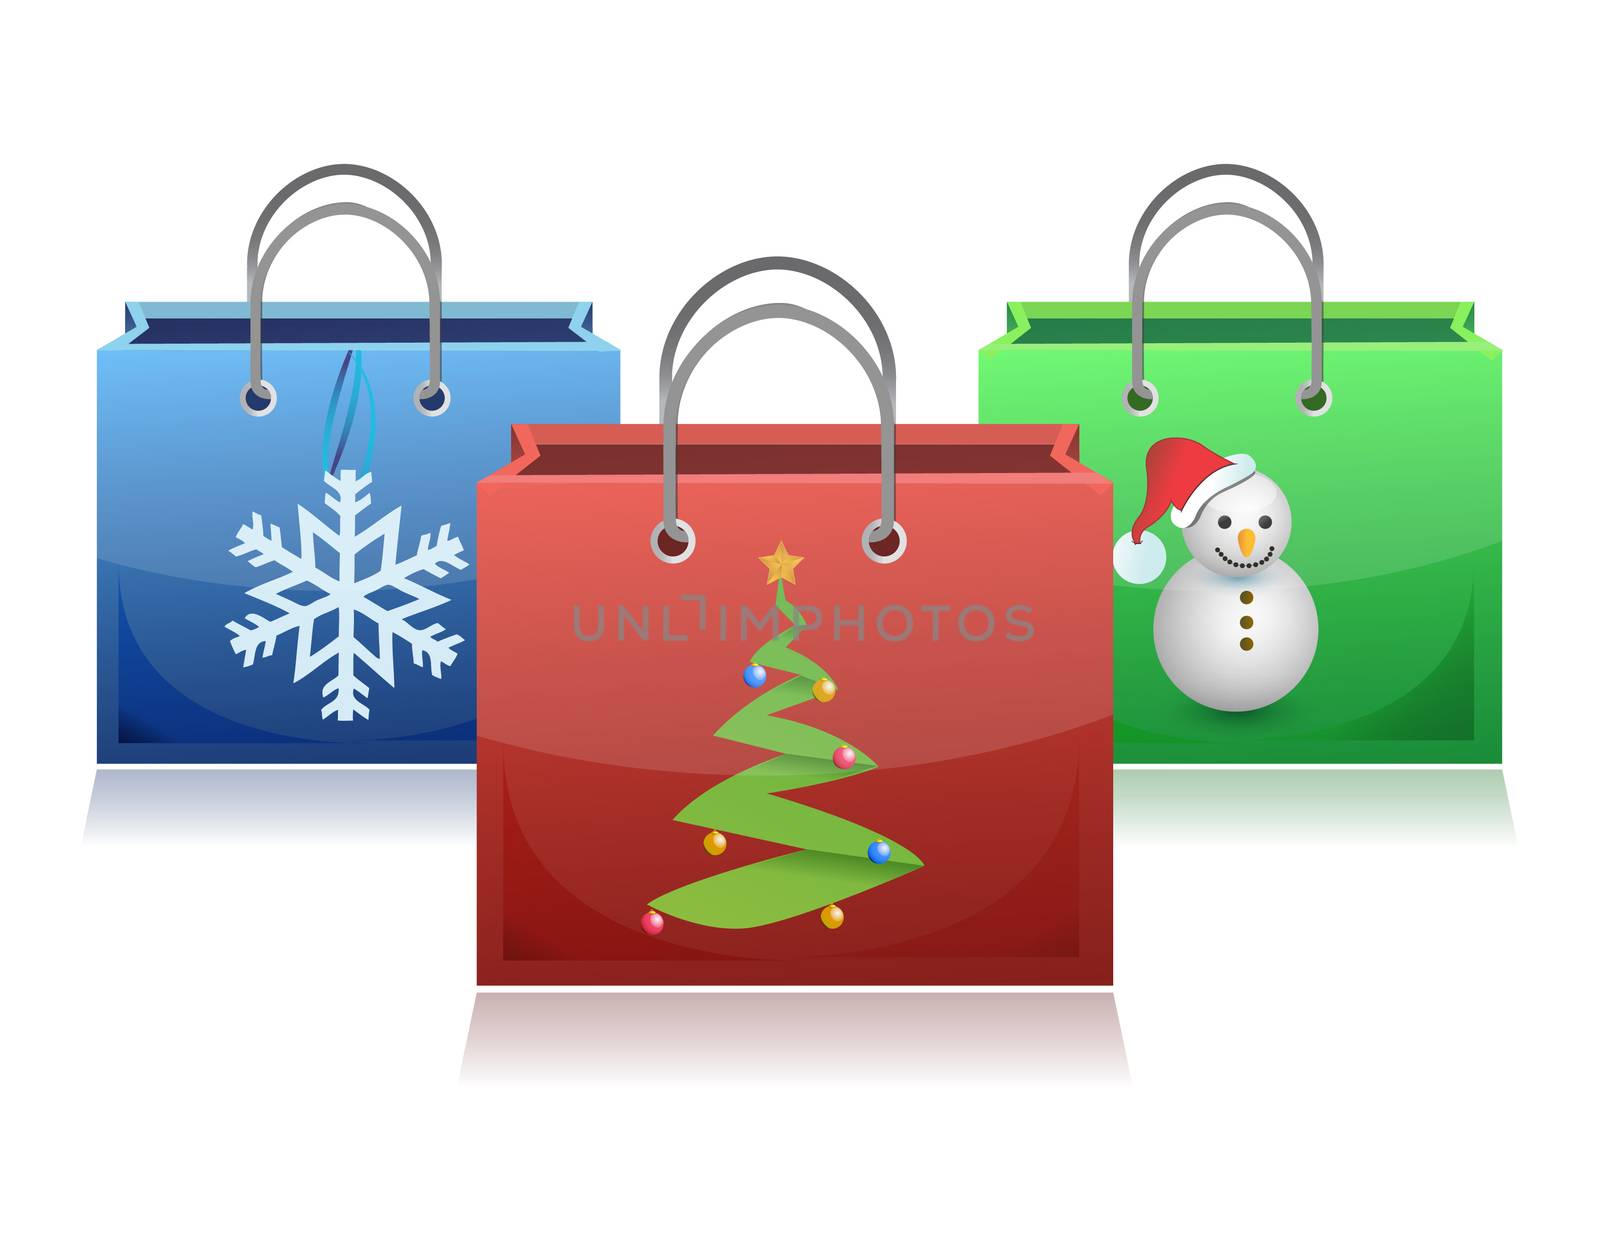 set of Christmas shopping bags illustration by alexmillos